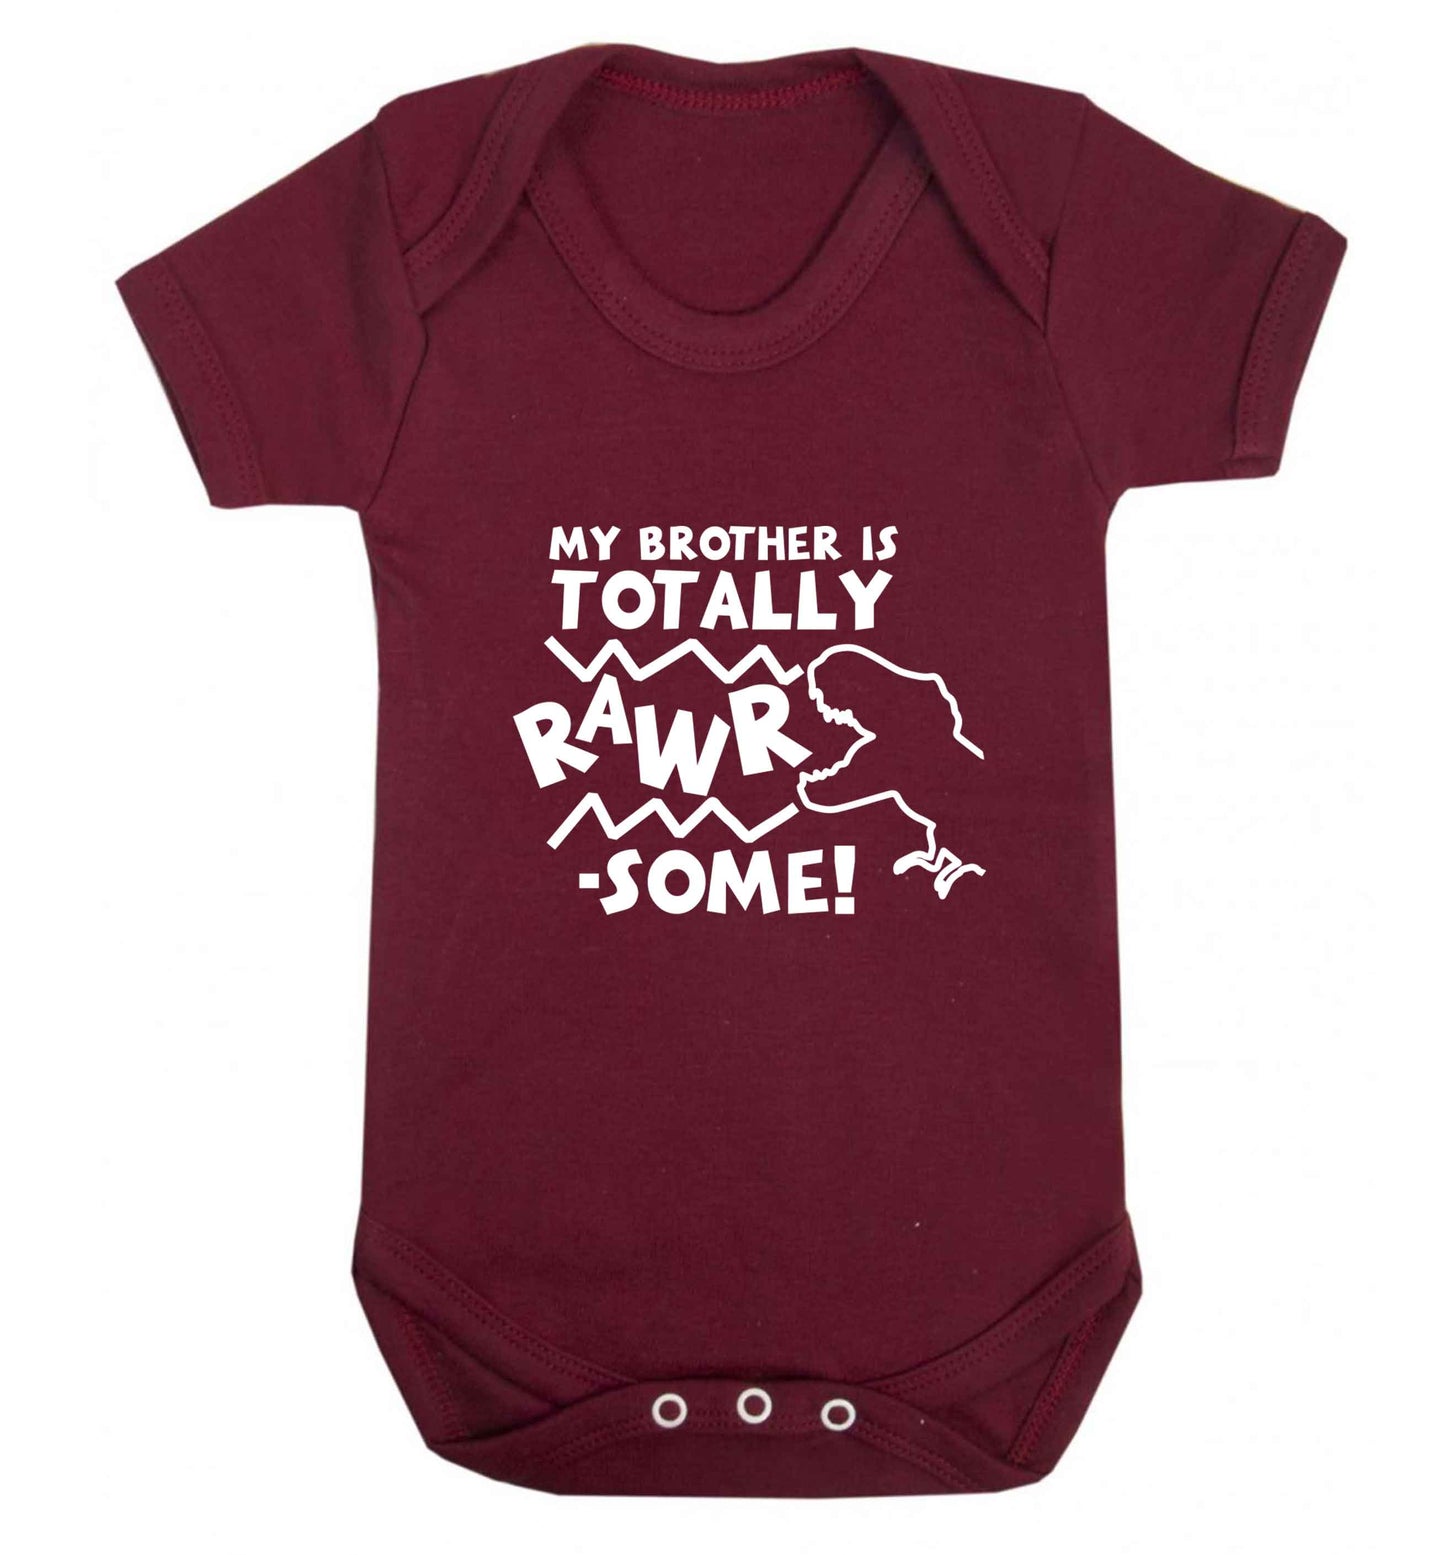 My brother is totally rawrsome baby vest maroon 18-24 months